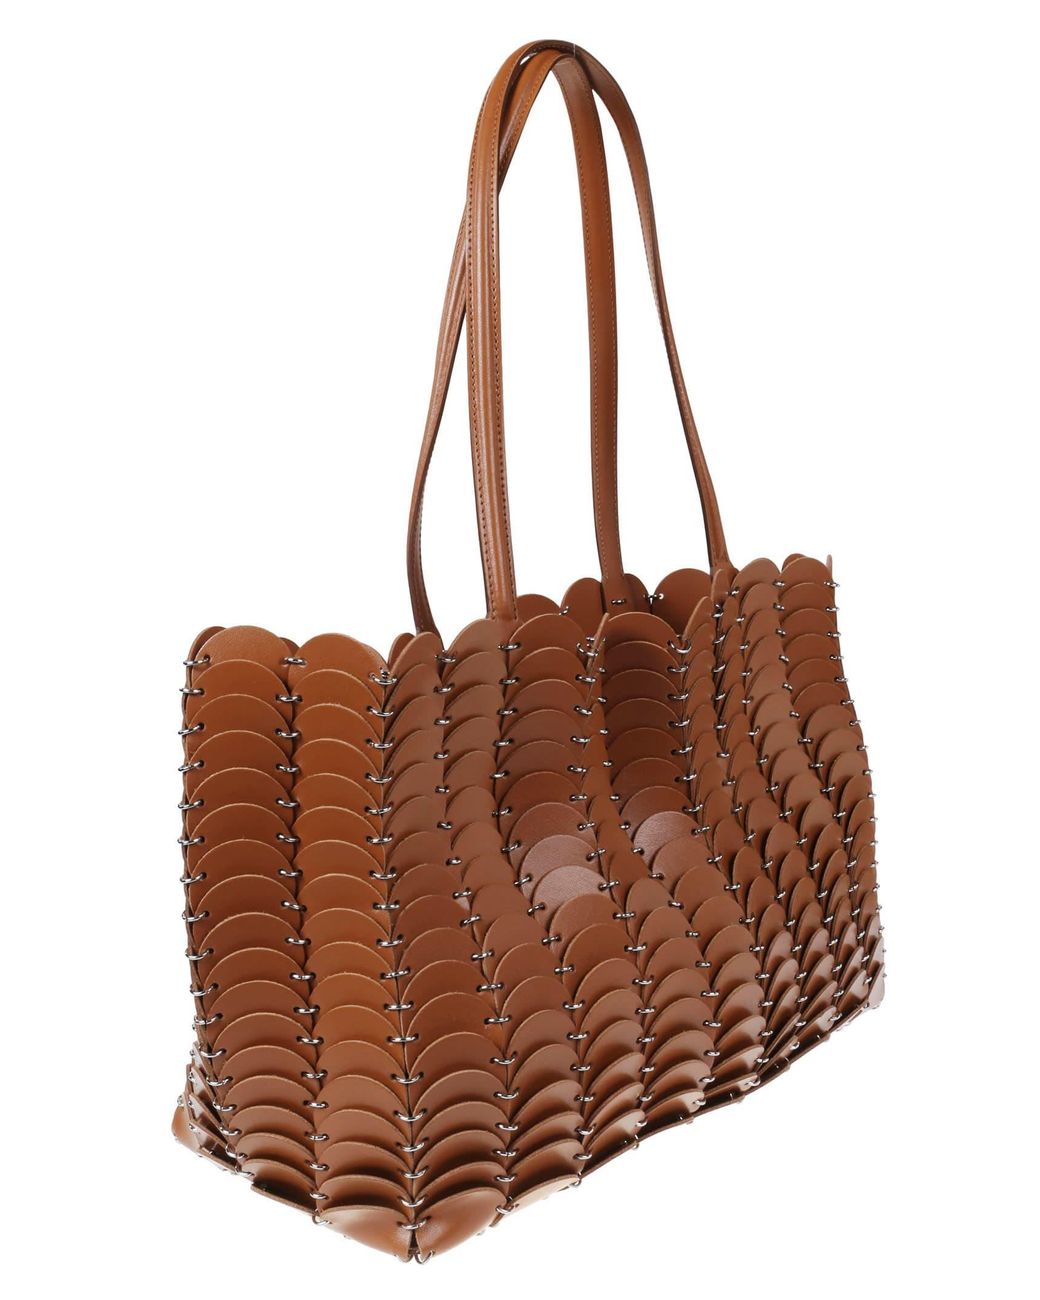 Paco Rabanne Leather Pacoio Cabas Bag in Cognac (Brown) | Lyst